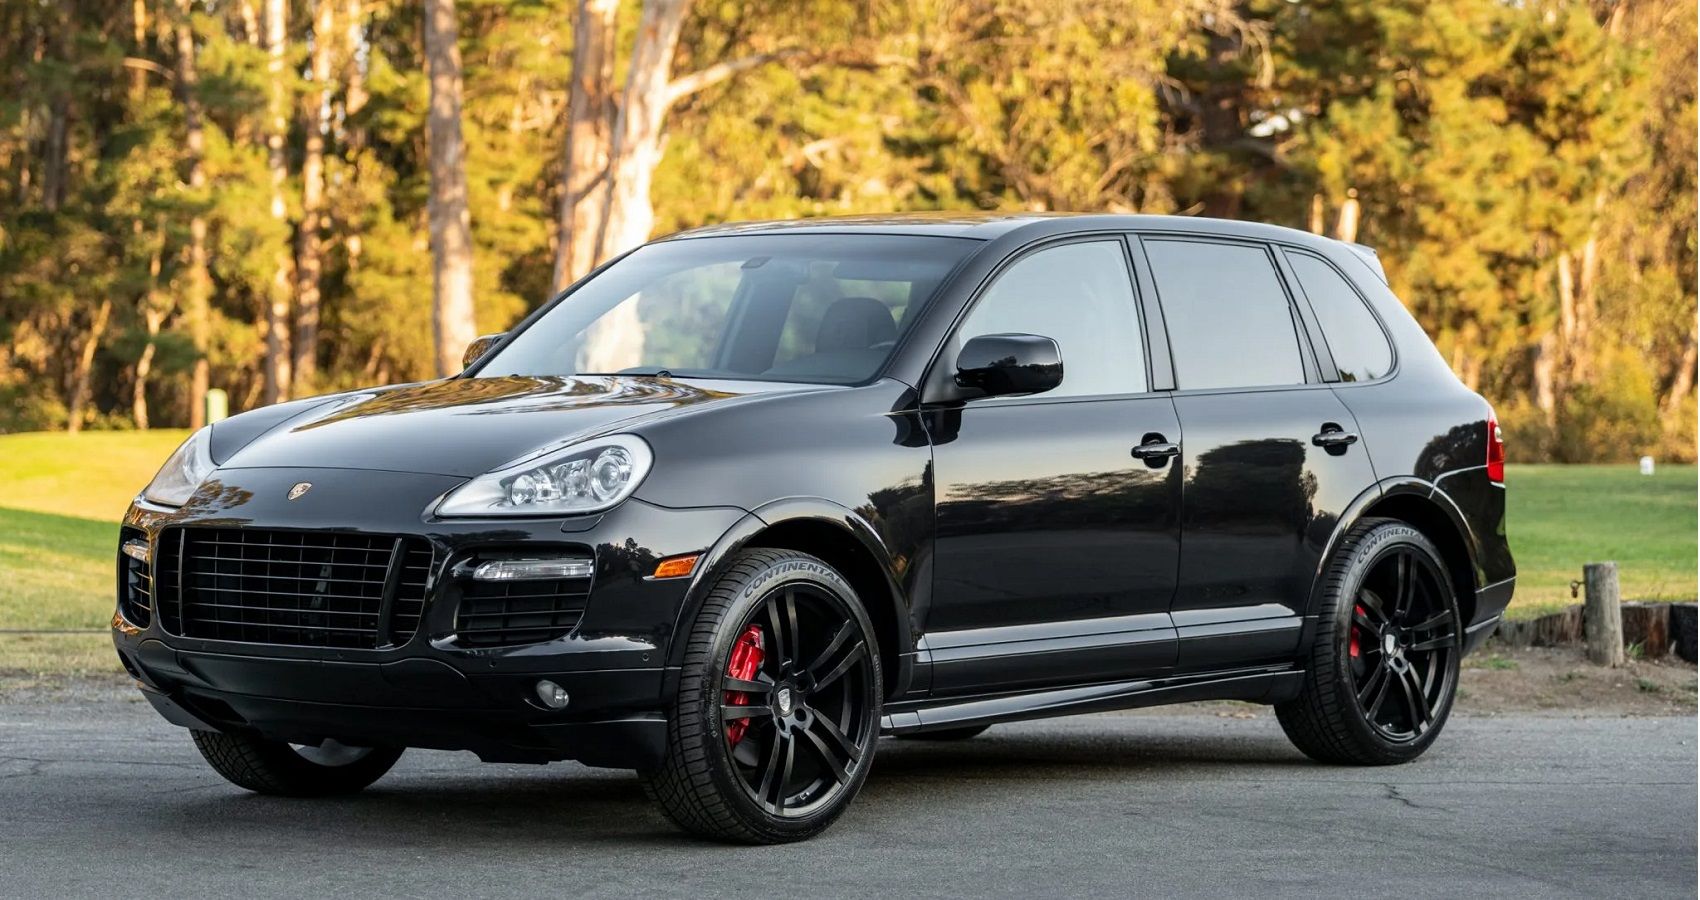 Here Are The Most Reliable Luxury SUVs To Buy Used (And 5 To Stay Away From)